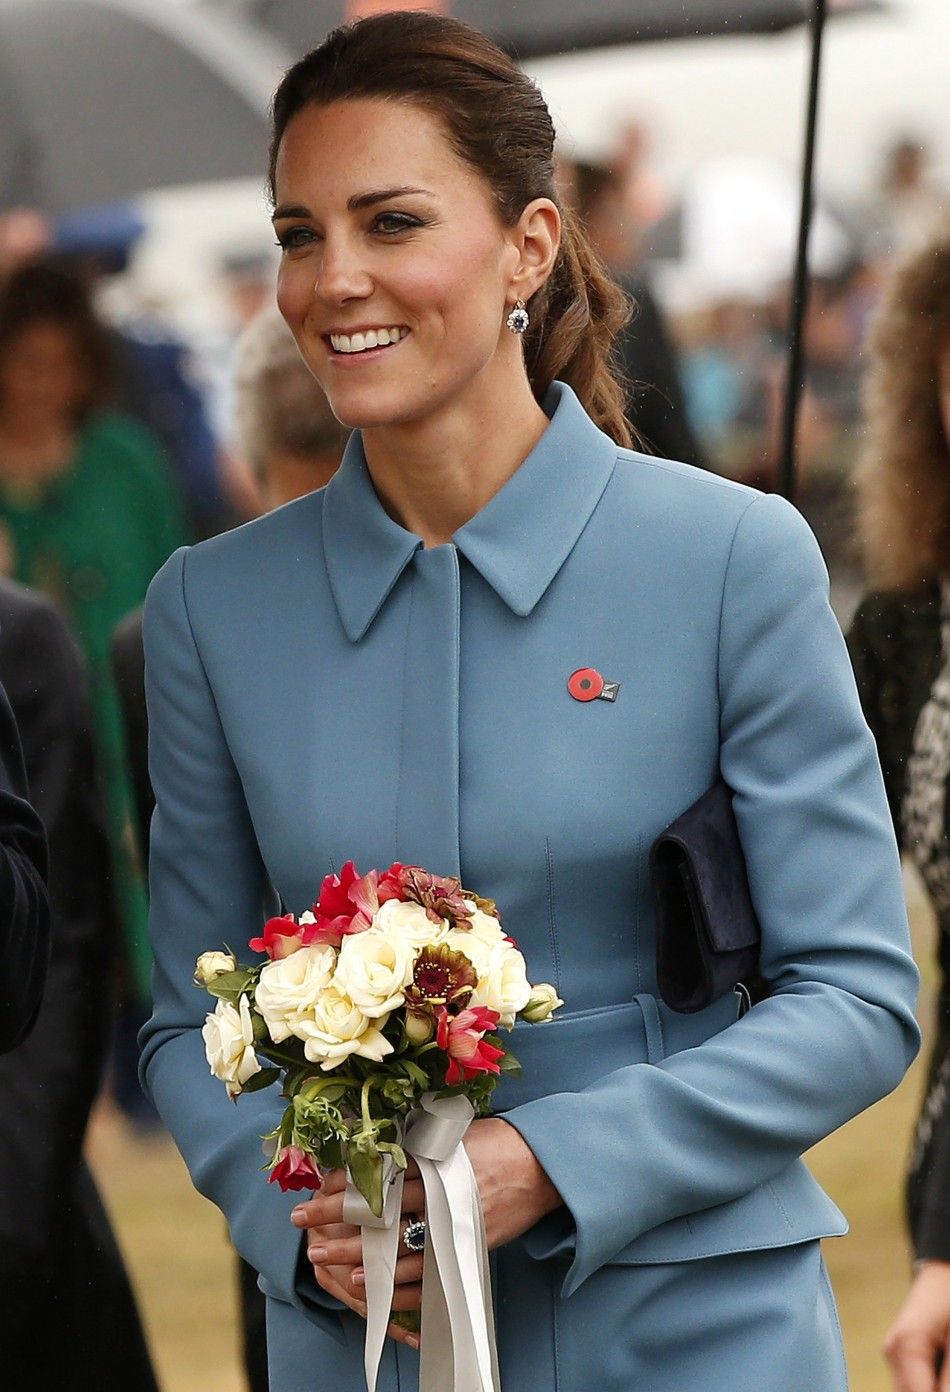 Britains Catherine, the Duchess of Cambridge, smiles as she carries flowers at the Omaka Aviation Heritage Center near Blenheim